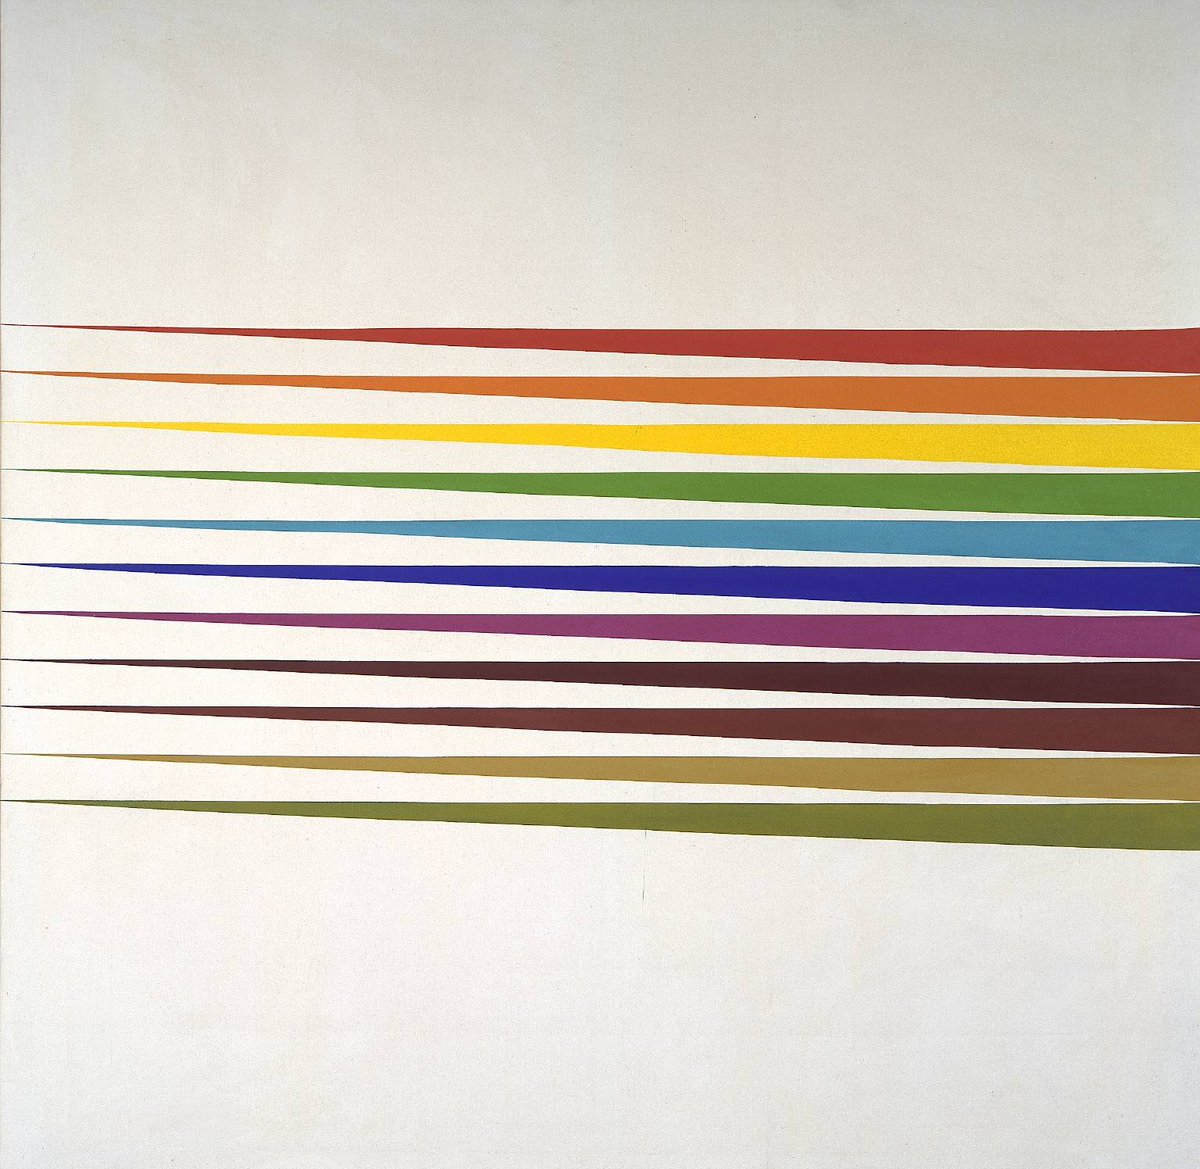 Today's colors.  https://www.tate.org.uk/art/artworks/plumb-untitled-august-1969-t01156